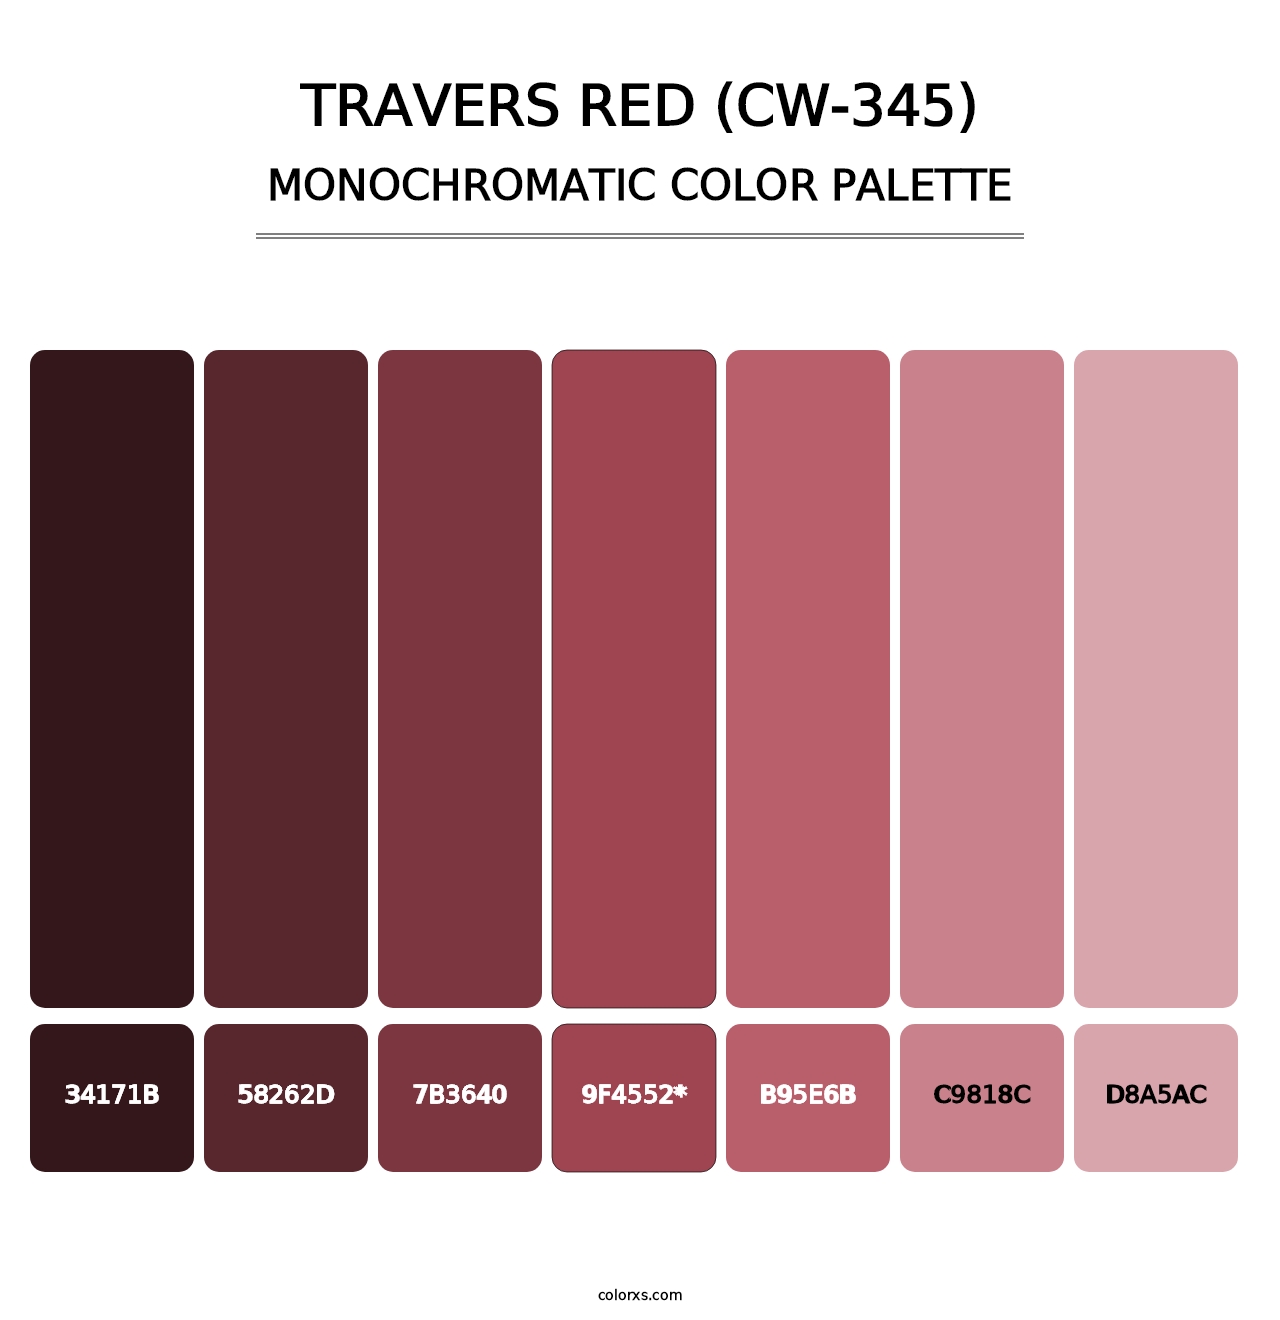 Travers Red (CW-345) - Monochromatic Color Palette